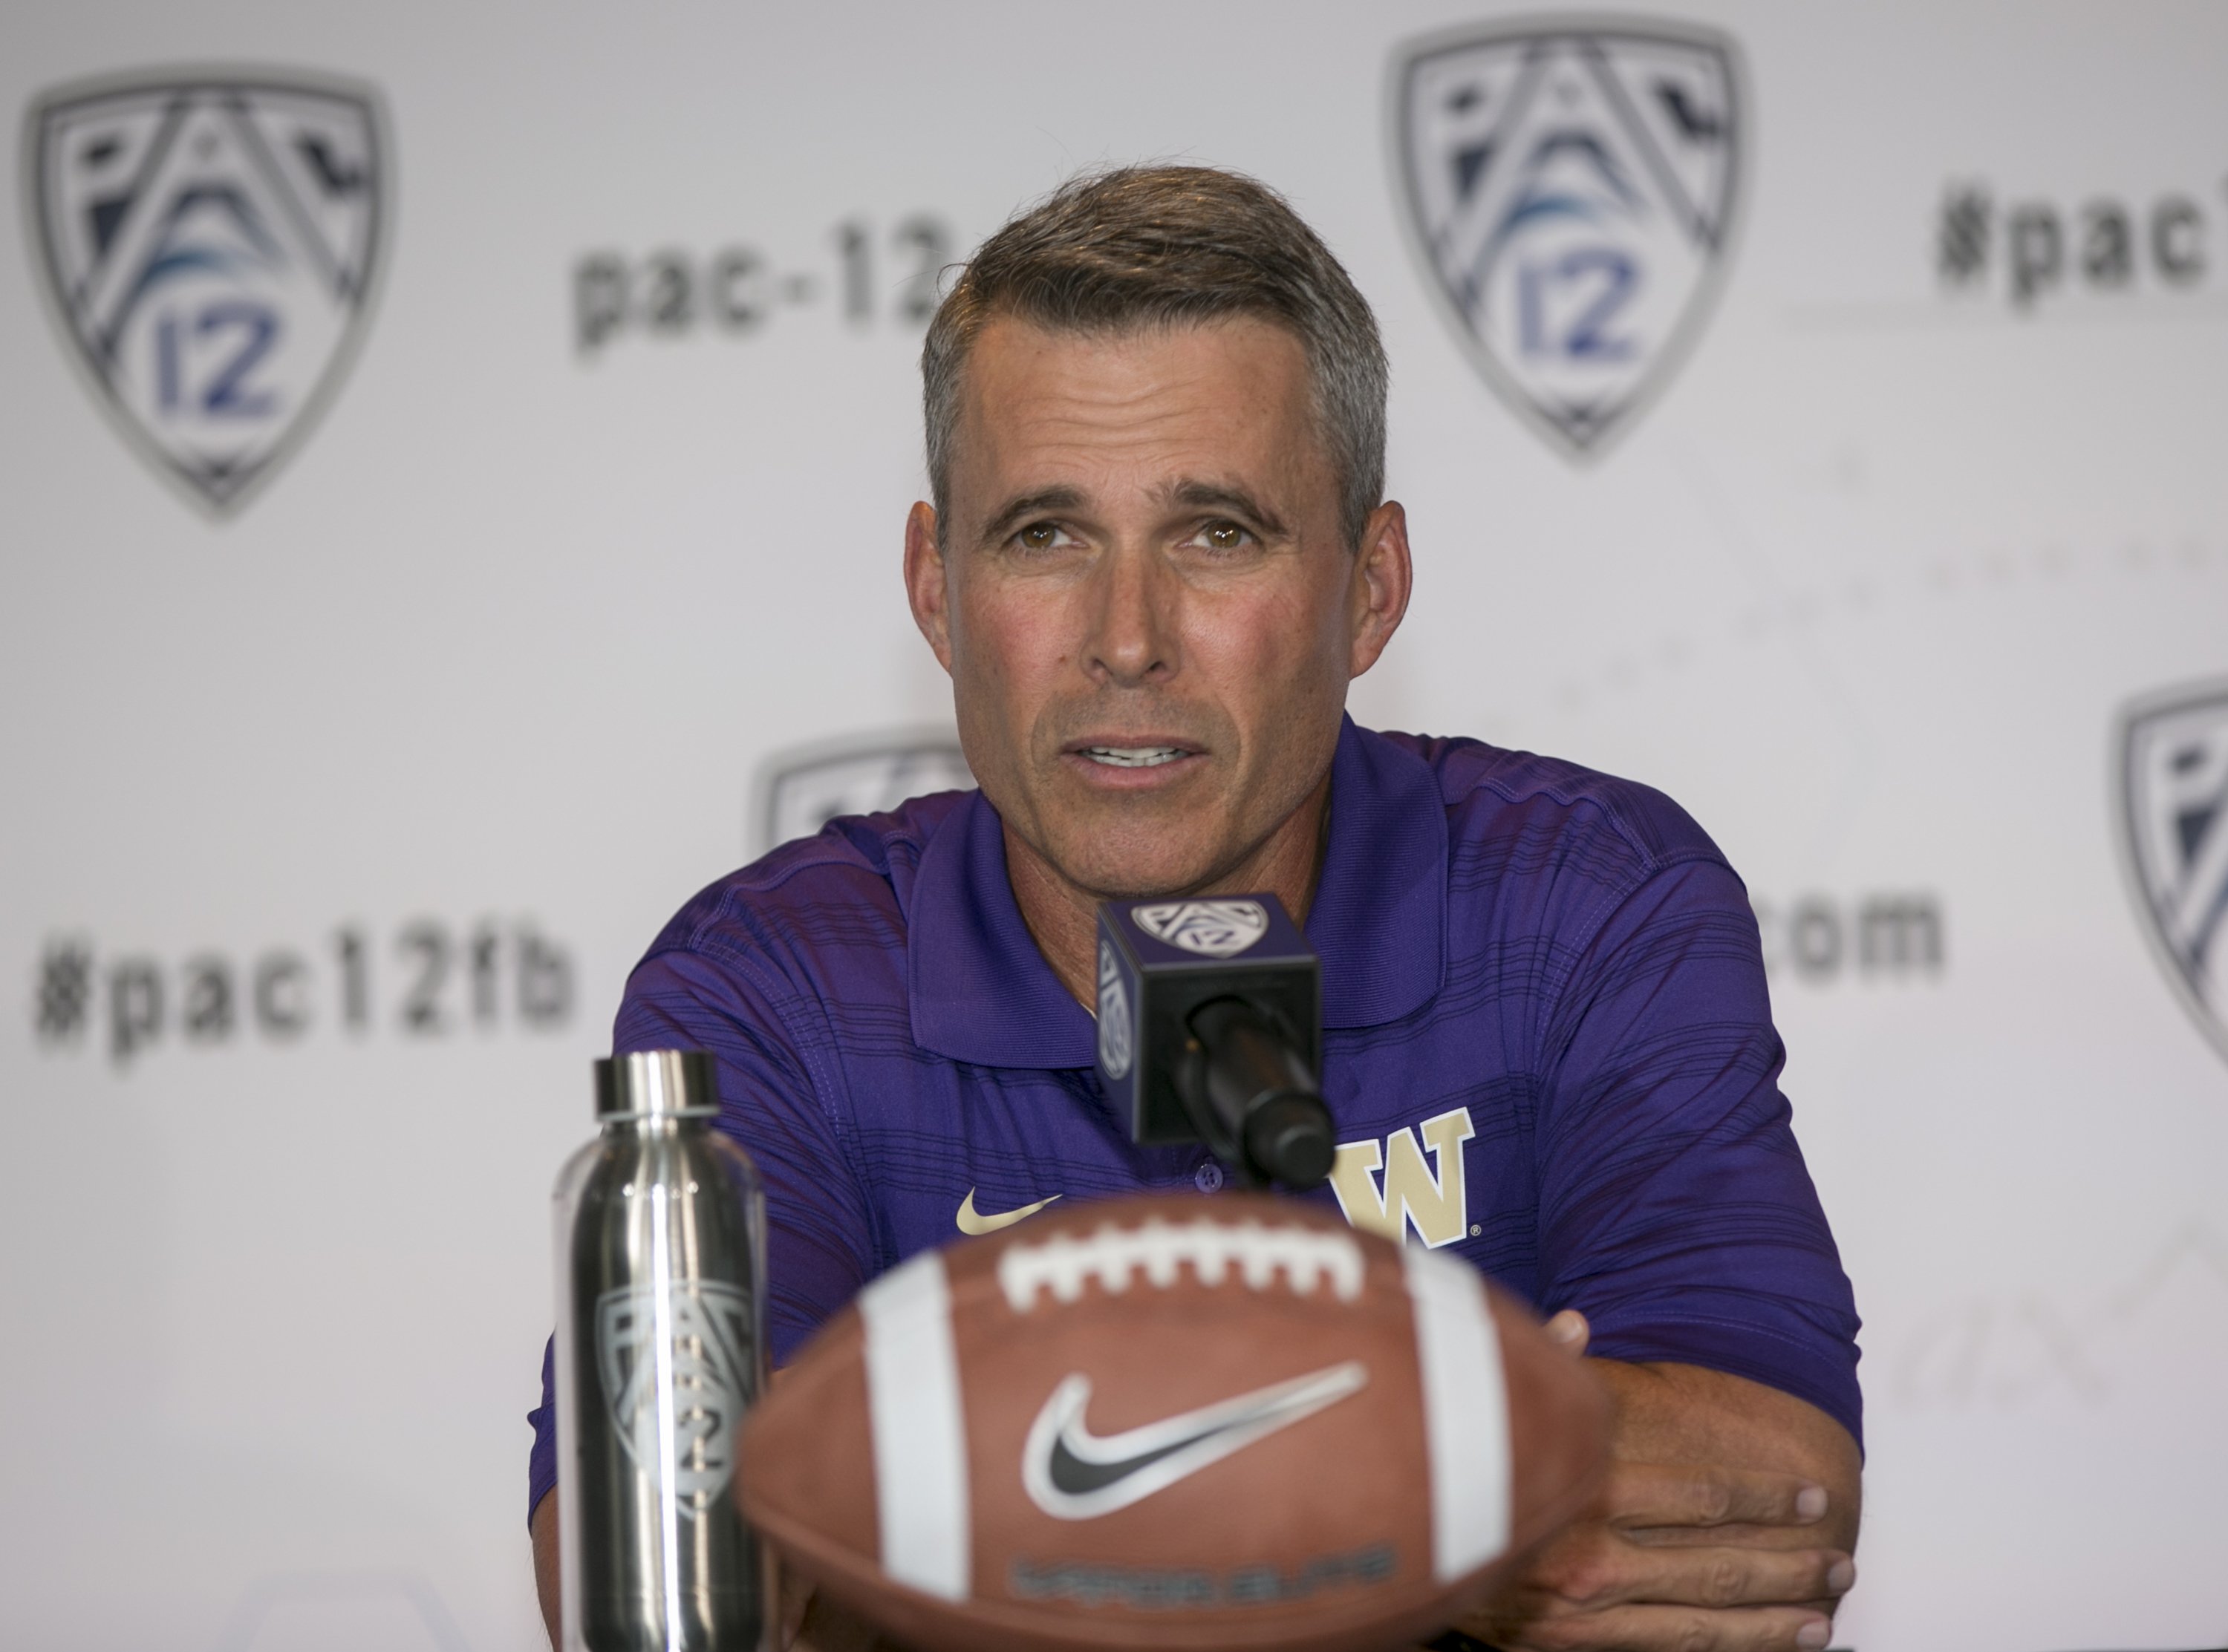 Washington head coach Chris Petersen takes questions at the 2014 Pac-12 NCAA college football media days at Paramount Studios in Los Angeles Thursday, July 24, 2014. (AP Photo)  CADD103